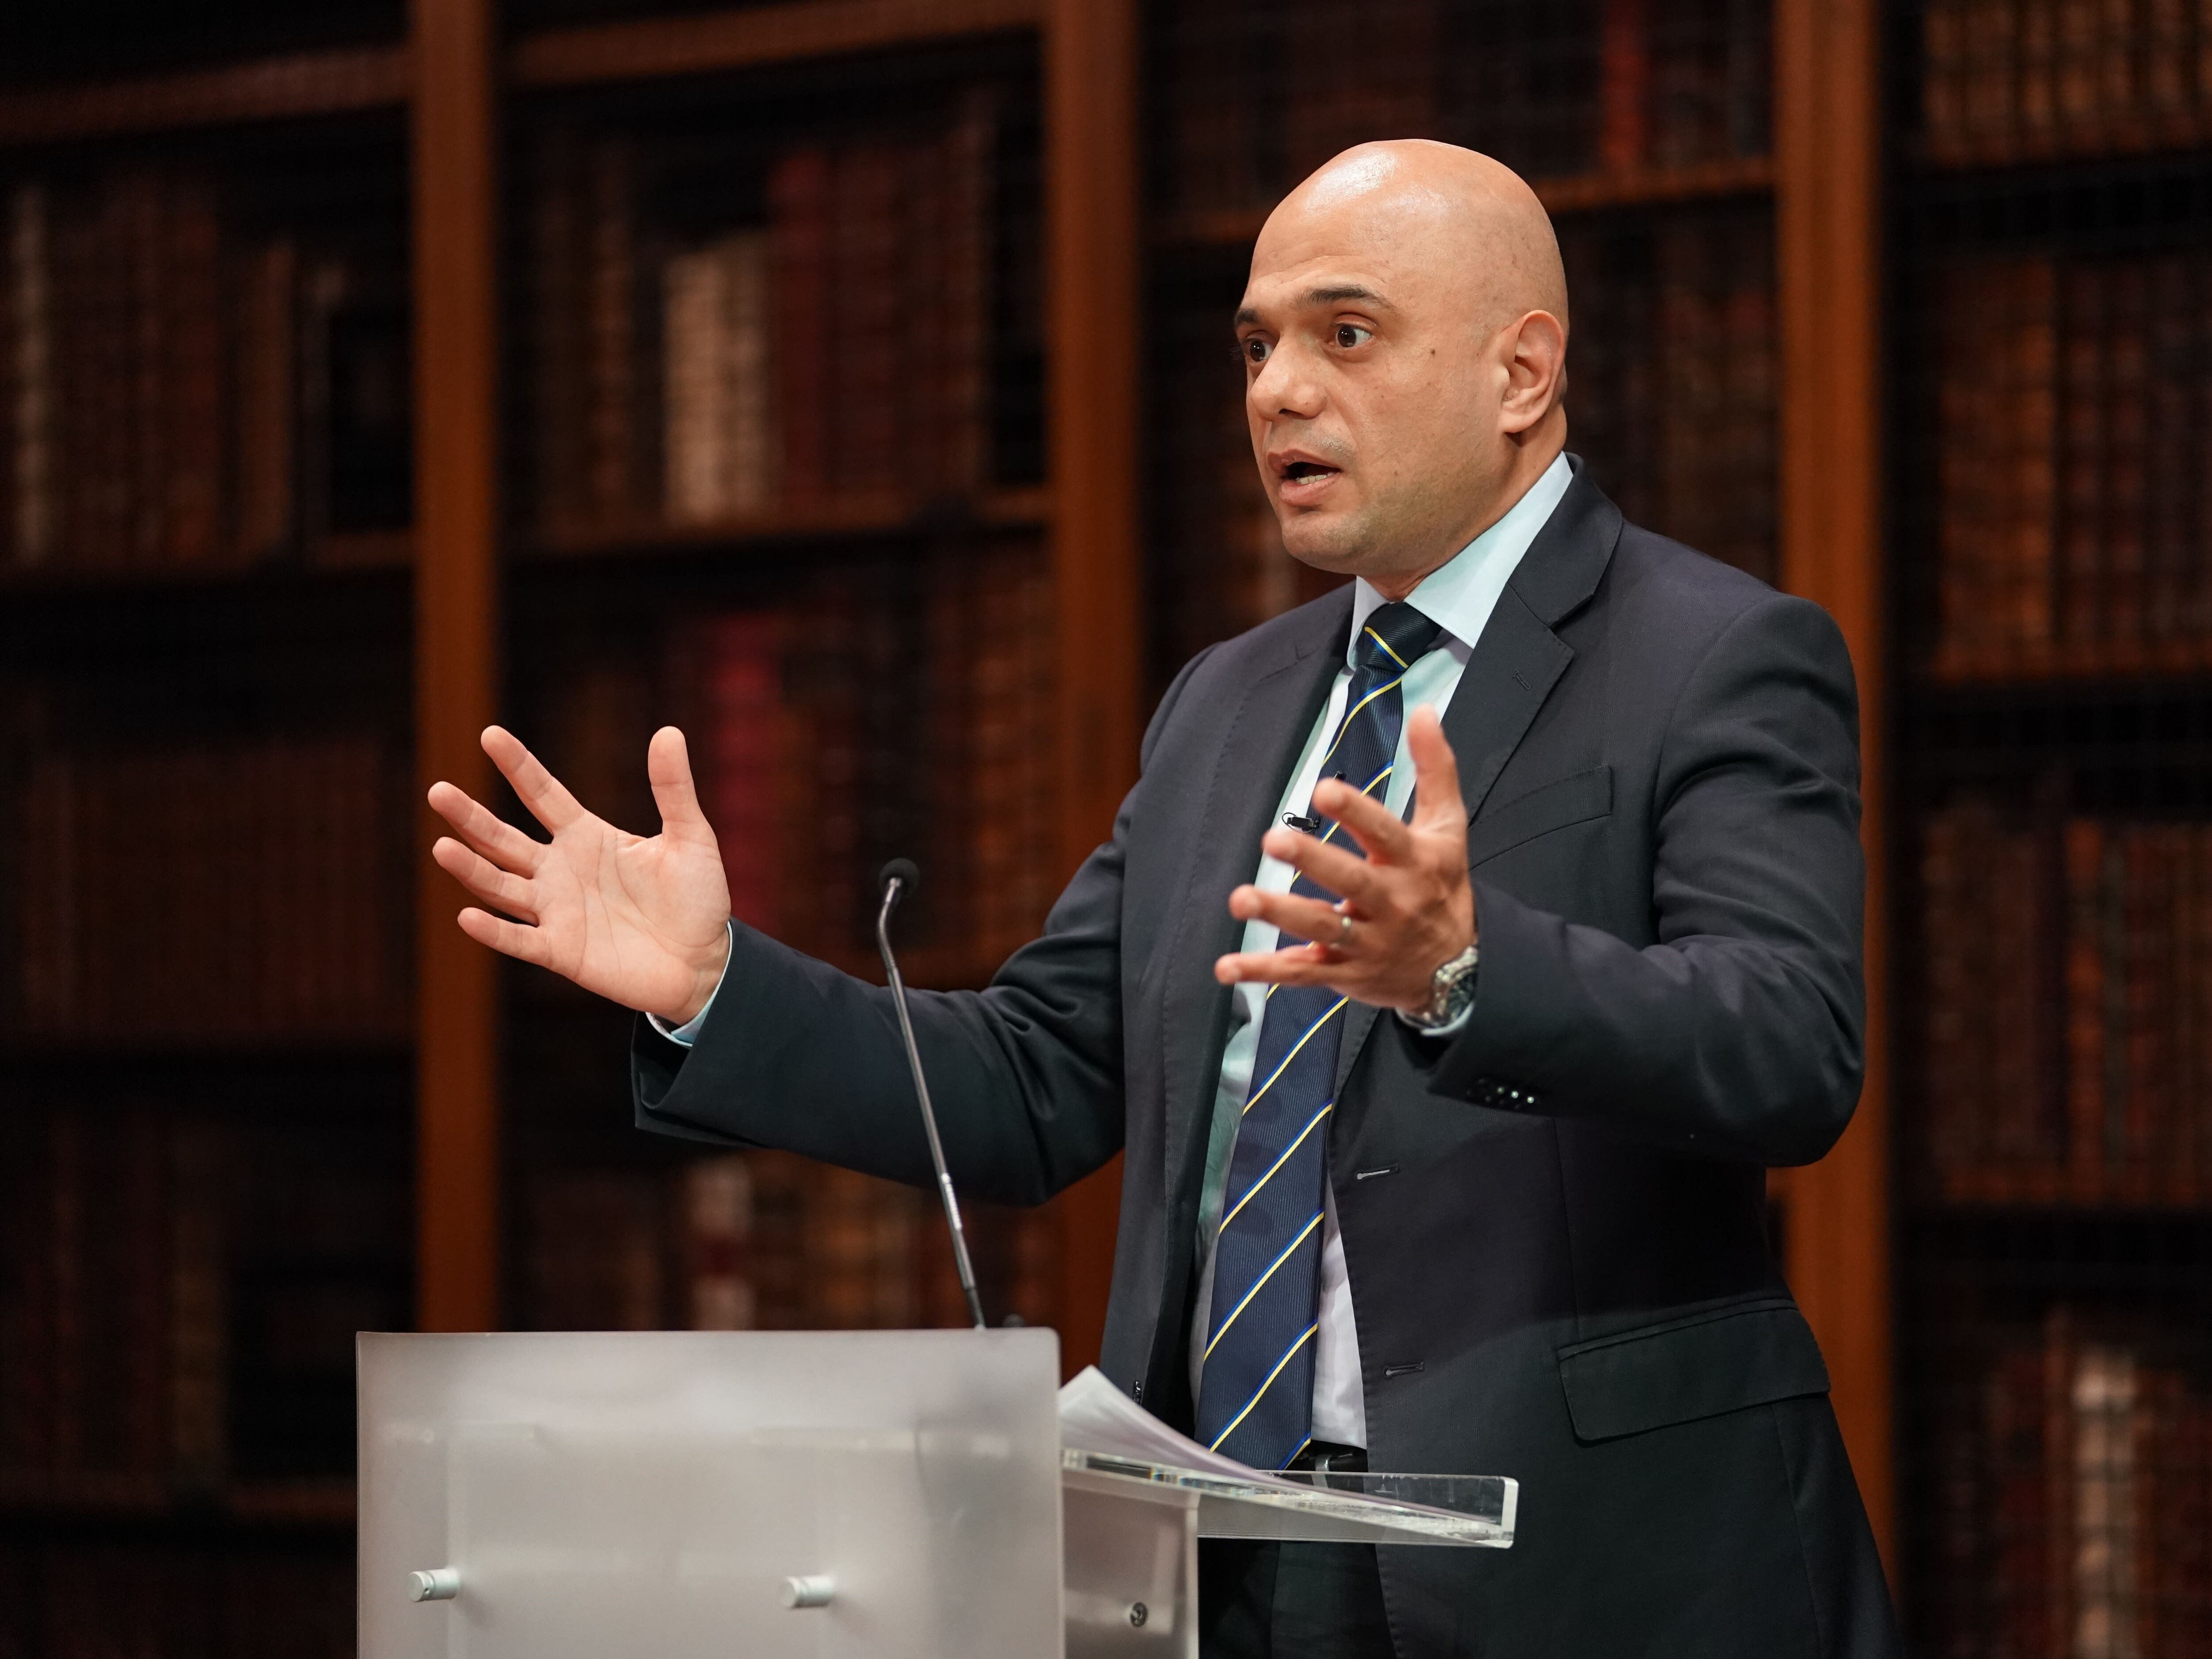 ‘Reform is essential’ – Sajid Javid sets out his vision for the NHS